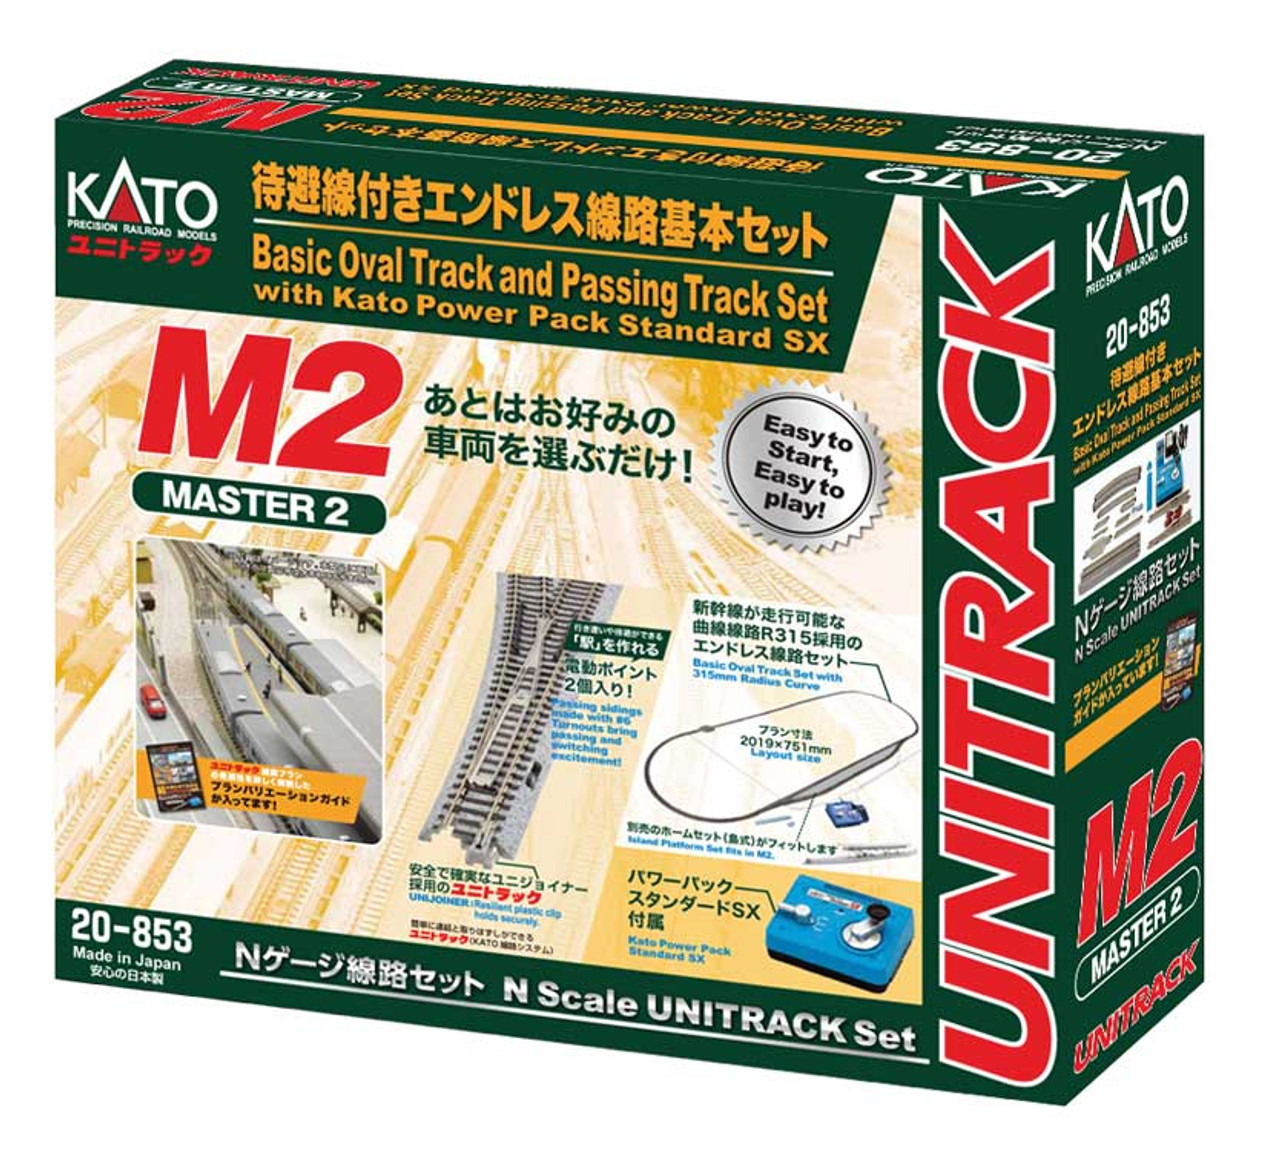 M2 Basic Oval and Passing Track Set with Power Pack - Unitrack -- 79-1/2 x 29-9/16&quot;  201.9 x 75.1cm Oval, 12-3/8 Radius Cur